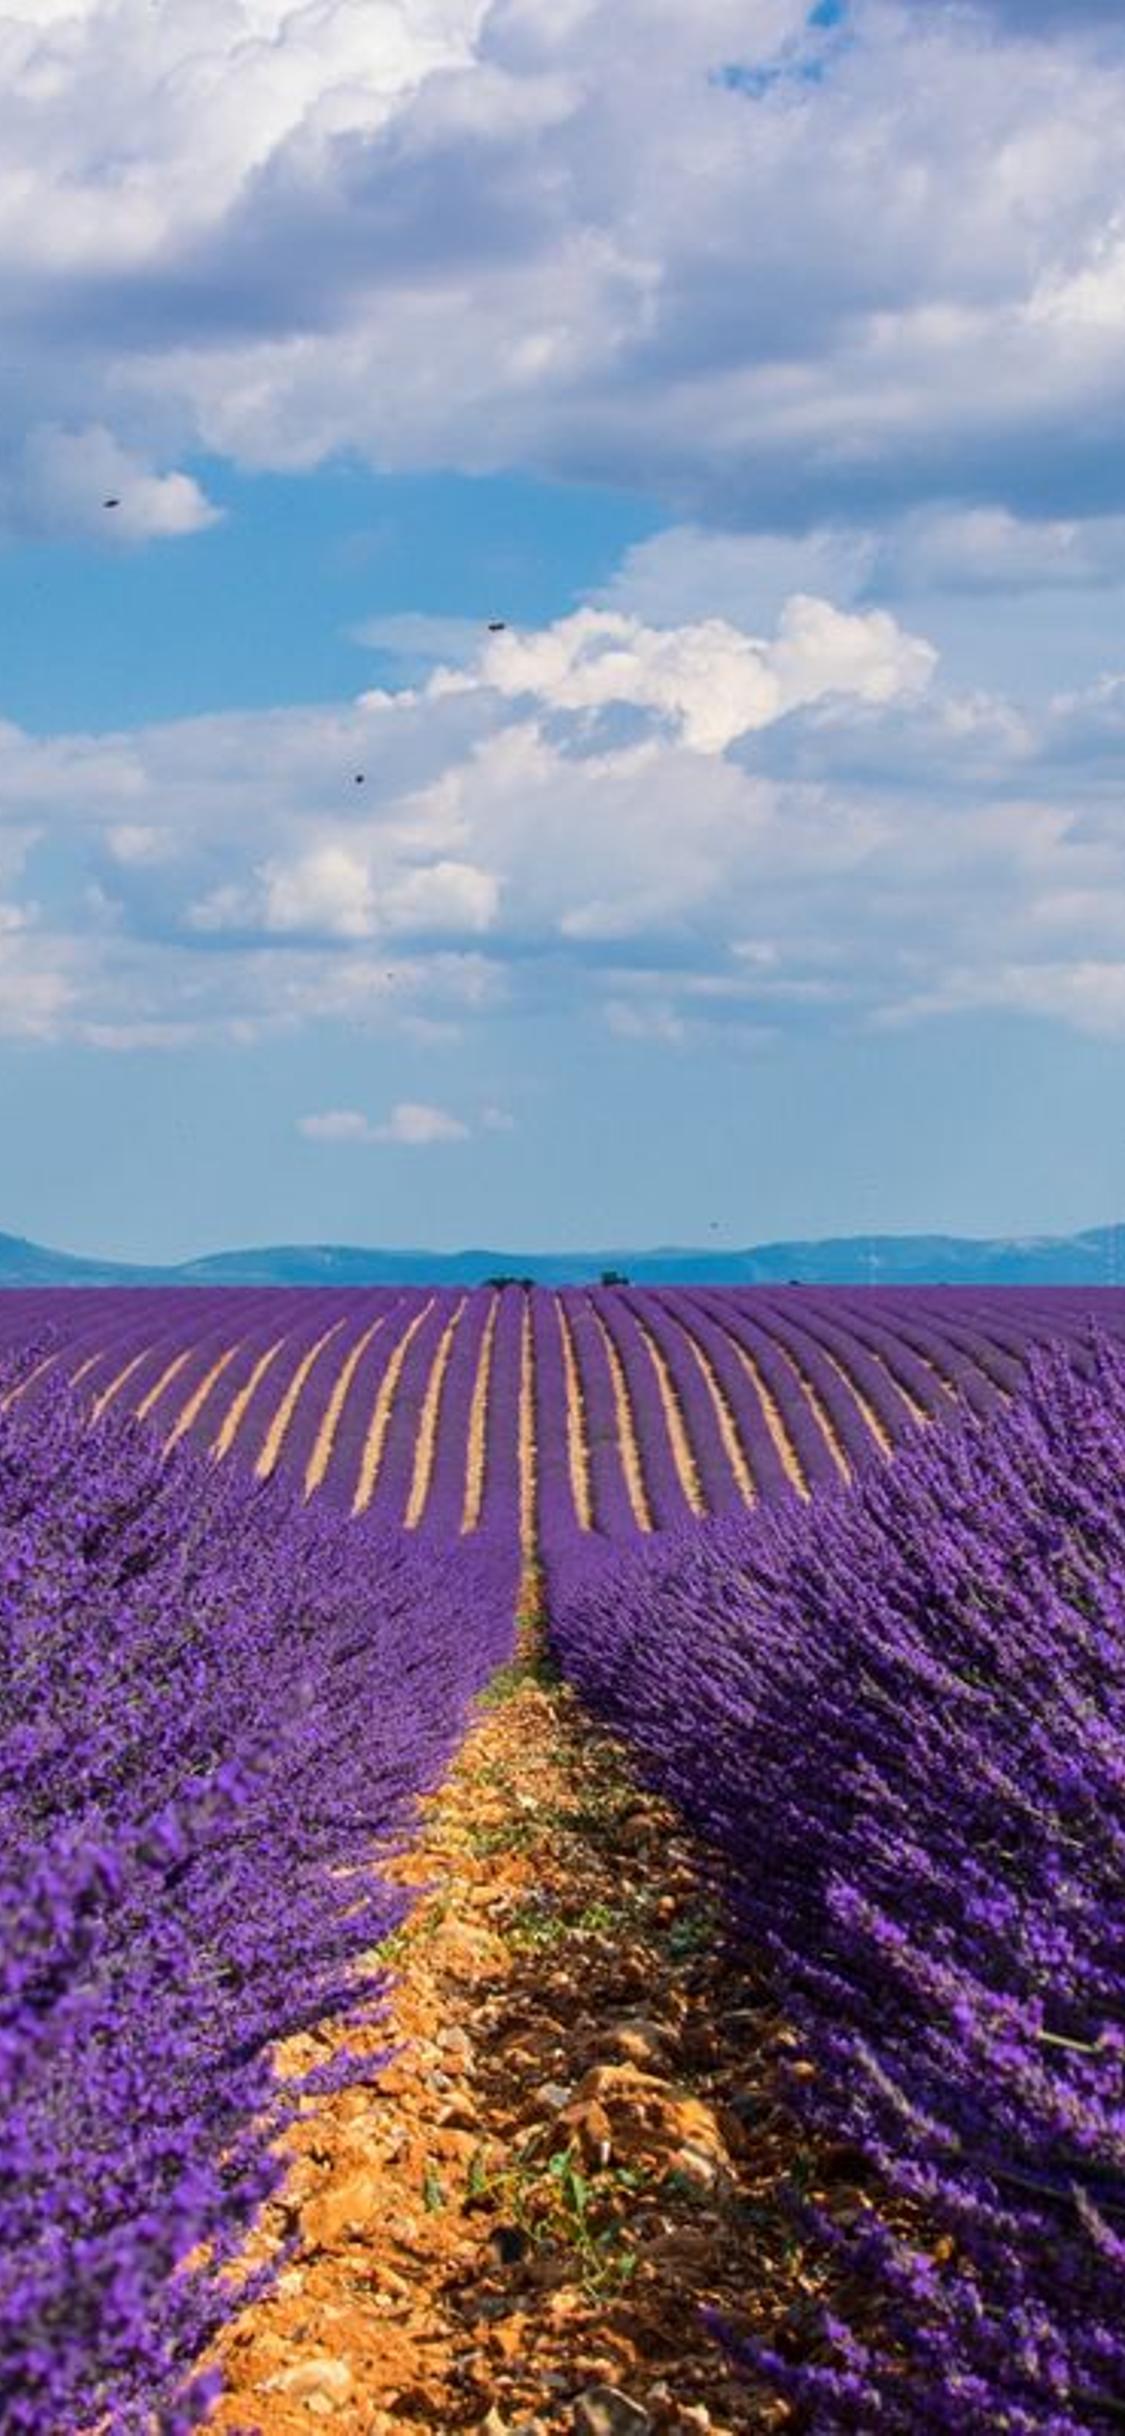 Country path in the middle of Lavender field -Purple perfume